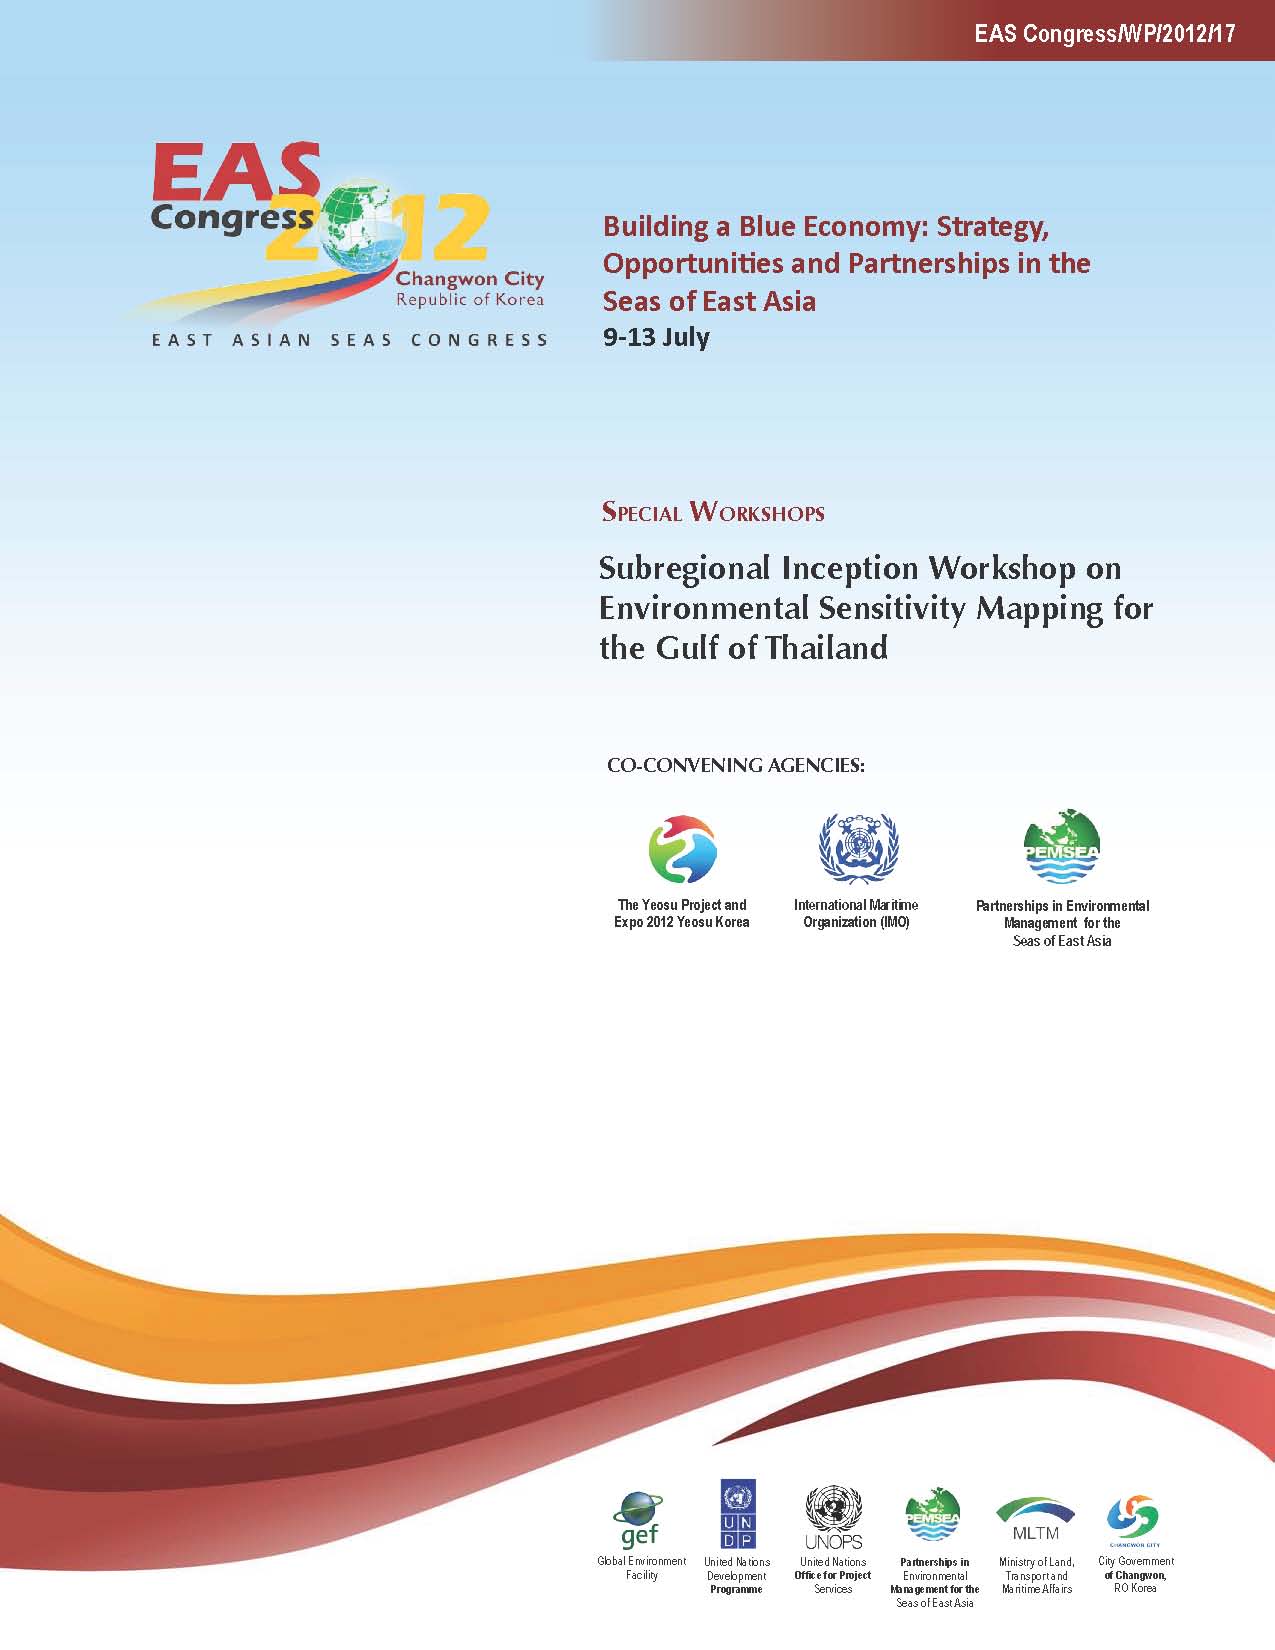 Proceedings of the Subregional Inception Workshop on Environmental Sensitivity Mapping for the Gulf of Thailand